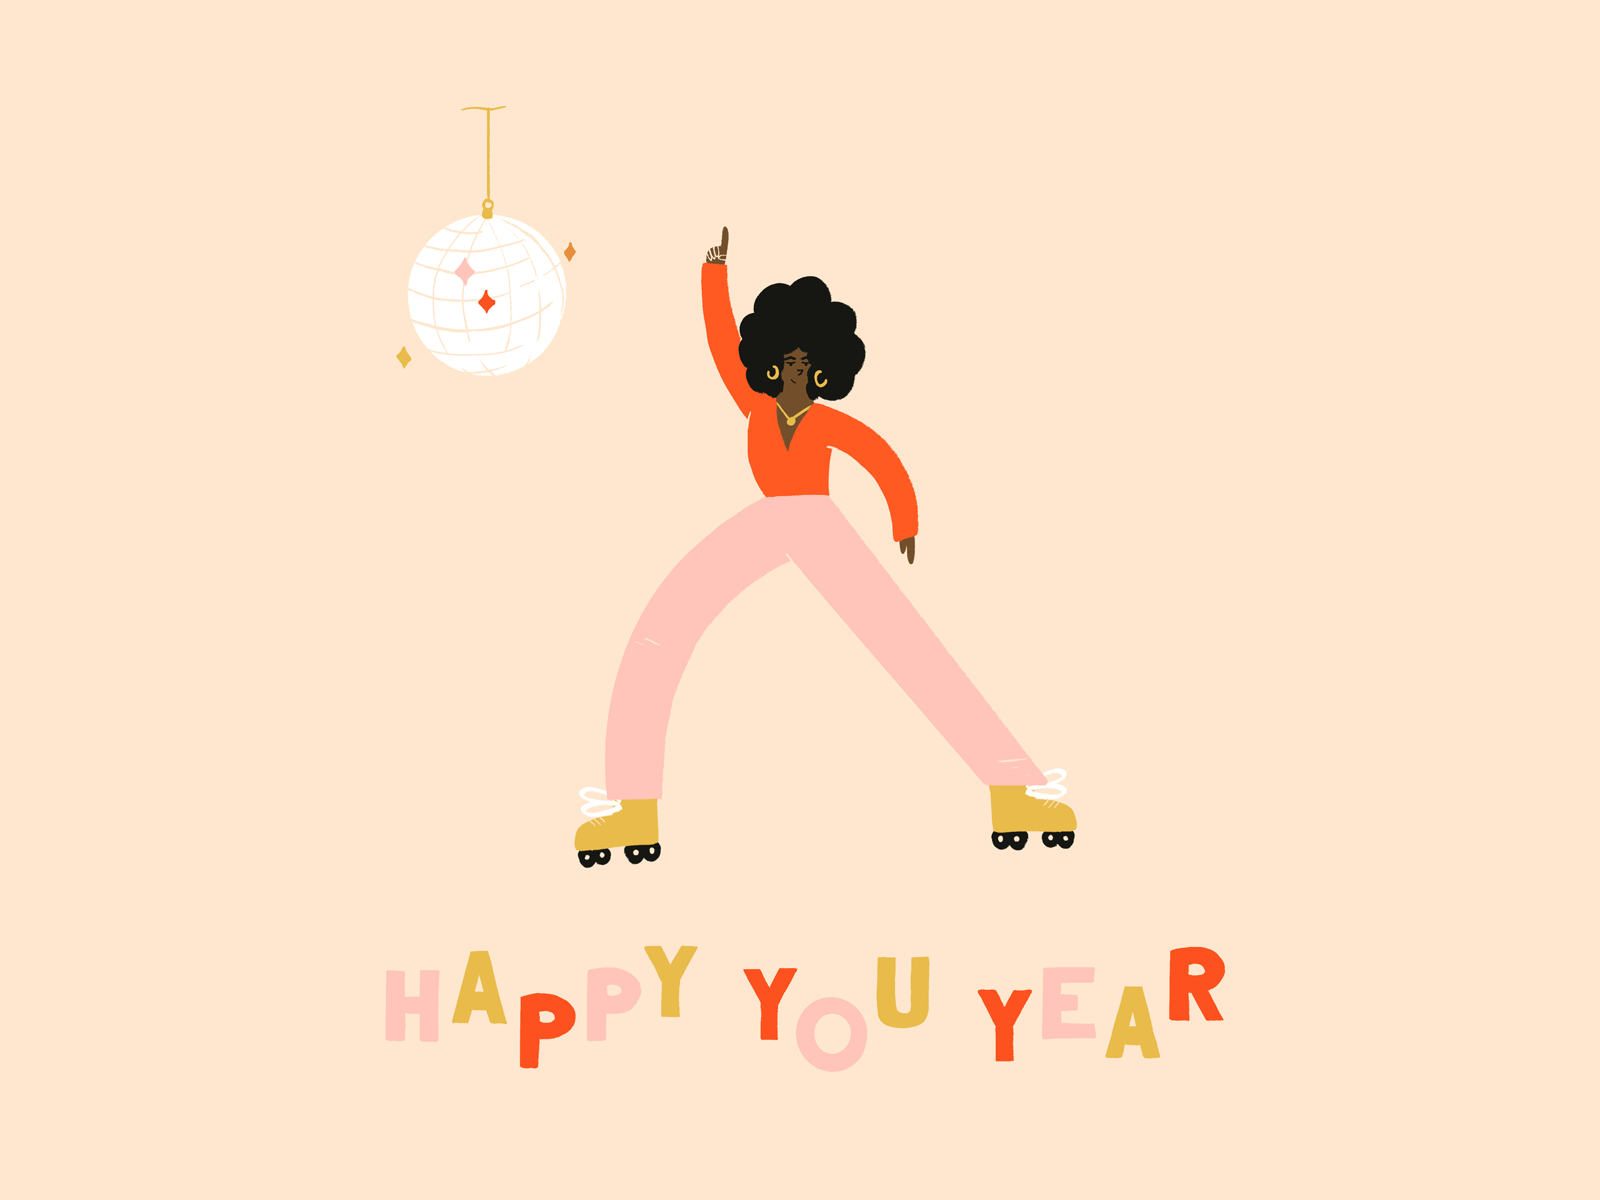 Happy You Year 2020 animated gif animation character illustration dancer design disco flat illustration giphy graphic design hand lettering holiday illustration ipad pro new years new years eve procreate roller skates type typography